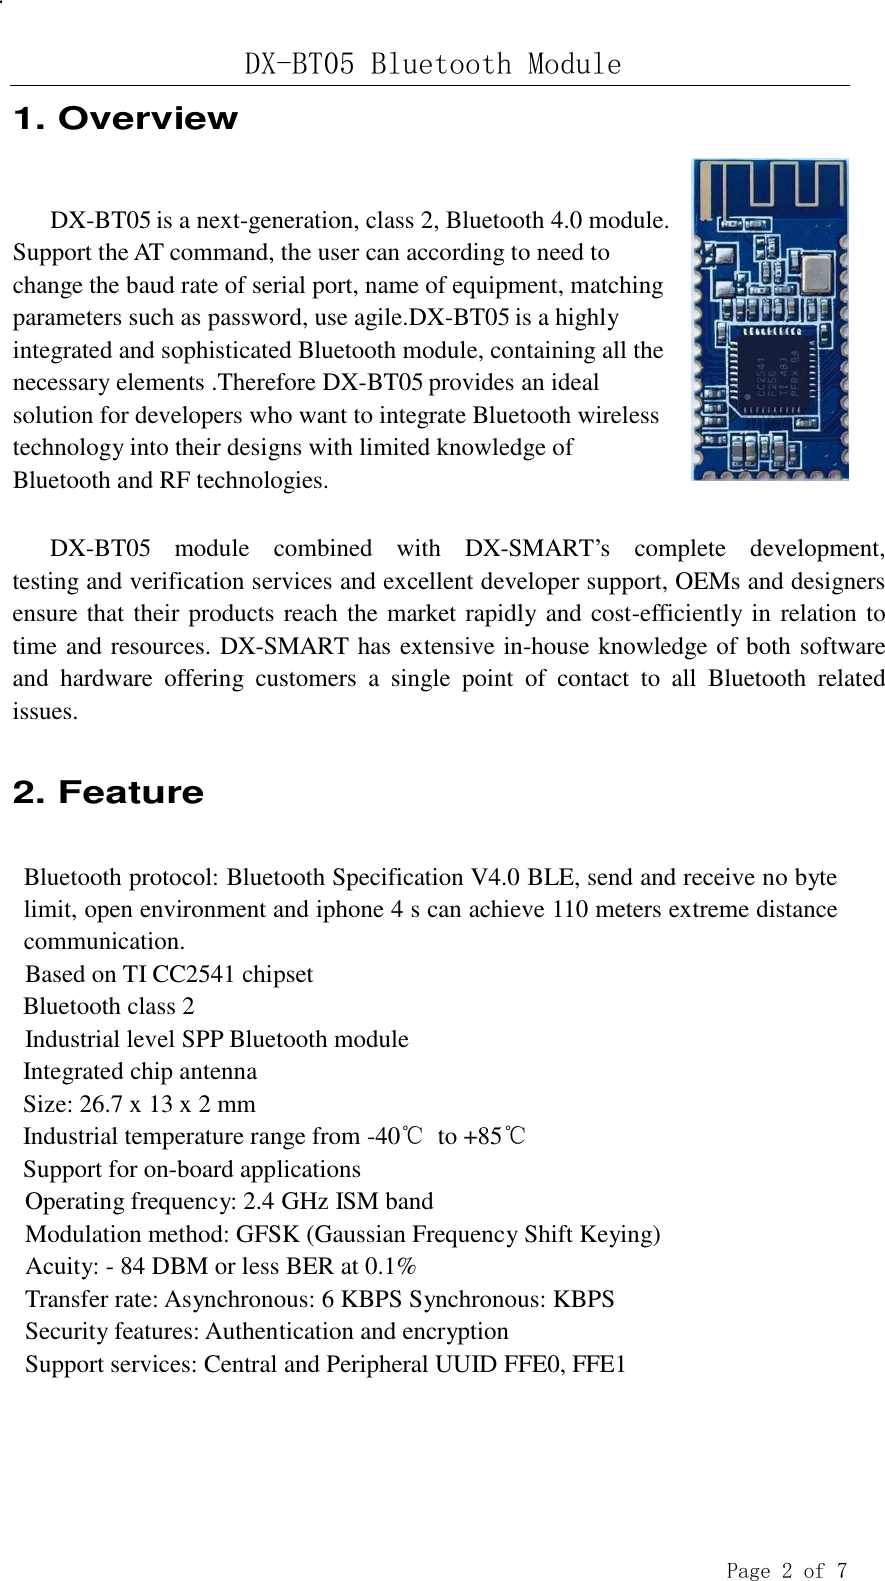 DX-BT05 Bluetooth Module  Page 2 of 7 .   1. Overview   DX-BT05 is a next-generation, class 2, Bluetooth 4.0 module. Support the AT command, the user can according to need to change the baud rate of serial port, name of equipment, matching parameters such as password, use agile.DX-BT05 is a highly integrated and sophisticated Bluetooth module, containing all the necessary elements .Therefore DX-BT05 provides an ideal solution for developers who want to integrate Bluetooth wireless technology into their designs with limited knowledge of Bluetooth and RF technologies.   DX-BT05  module  combined  with  DX-SMART’s  complete  development, testing and verification services and excellent developer support, OEMs and designers ensure that their products reach the market rapidly and cost-efficiently in relation to time and resources. DX-SMART has extensive in-house knowledge of both software and  hardware  offering  customers  a  single  point  of  contact  to  all  Bluetooth  related issues.   2. Feature   Bluetooth protocol: Bluetooth Specification V4.0 BLE, send and receive no byte limit, open environment and iphone 4 s can achieve 110 meters extreme distance communication. Based on TI CC2541 chipset Bluetooth class 2 Industrial level SPP Bluetooth module Integrated chip antenna Size: 26.7 x 13 x 2 mm Industrial temperature range from -40℃ to +85℃ Support for on-board applications Operating frequency: 2.4 GHz ISM band Modulation method: GFSK (Gaussian Frequency Shift Keying) Acuity: - 84 DBM or less BER at 0.1% Transfer rate: Asynchronous: 6 KBPS Synchronous: KBPS Security features: Authentication and encryption Support services: Central and Peripheral UUID FFE0, FFE1 